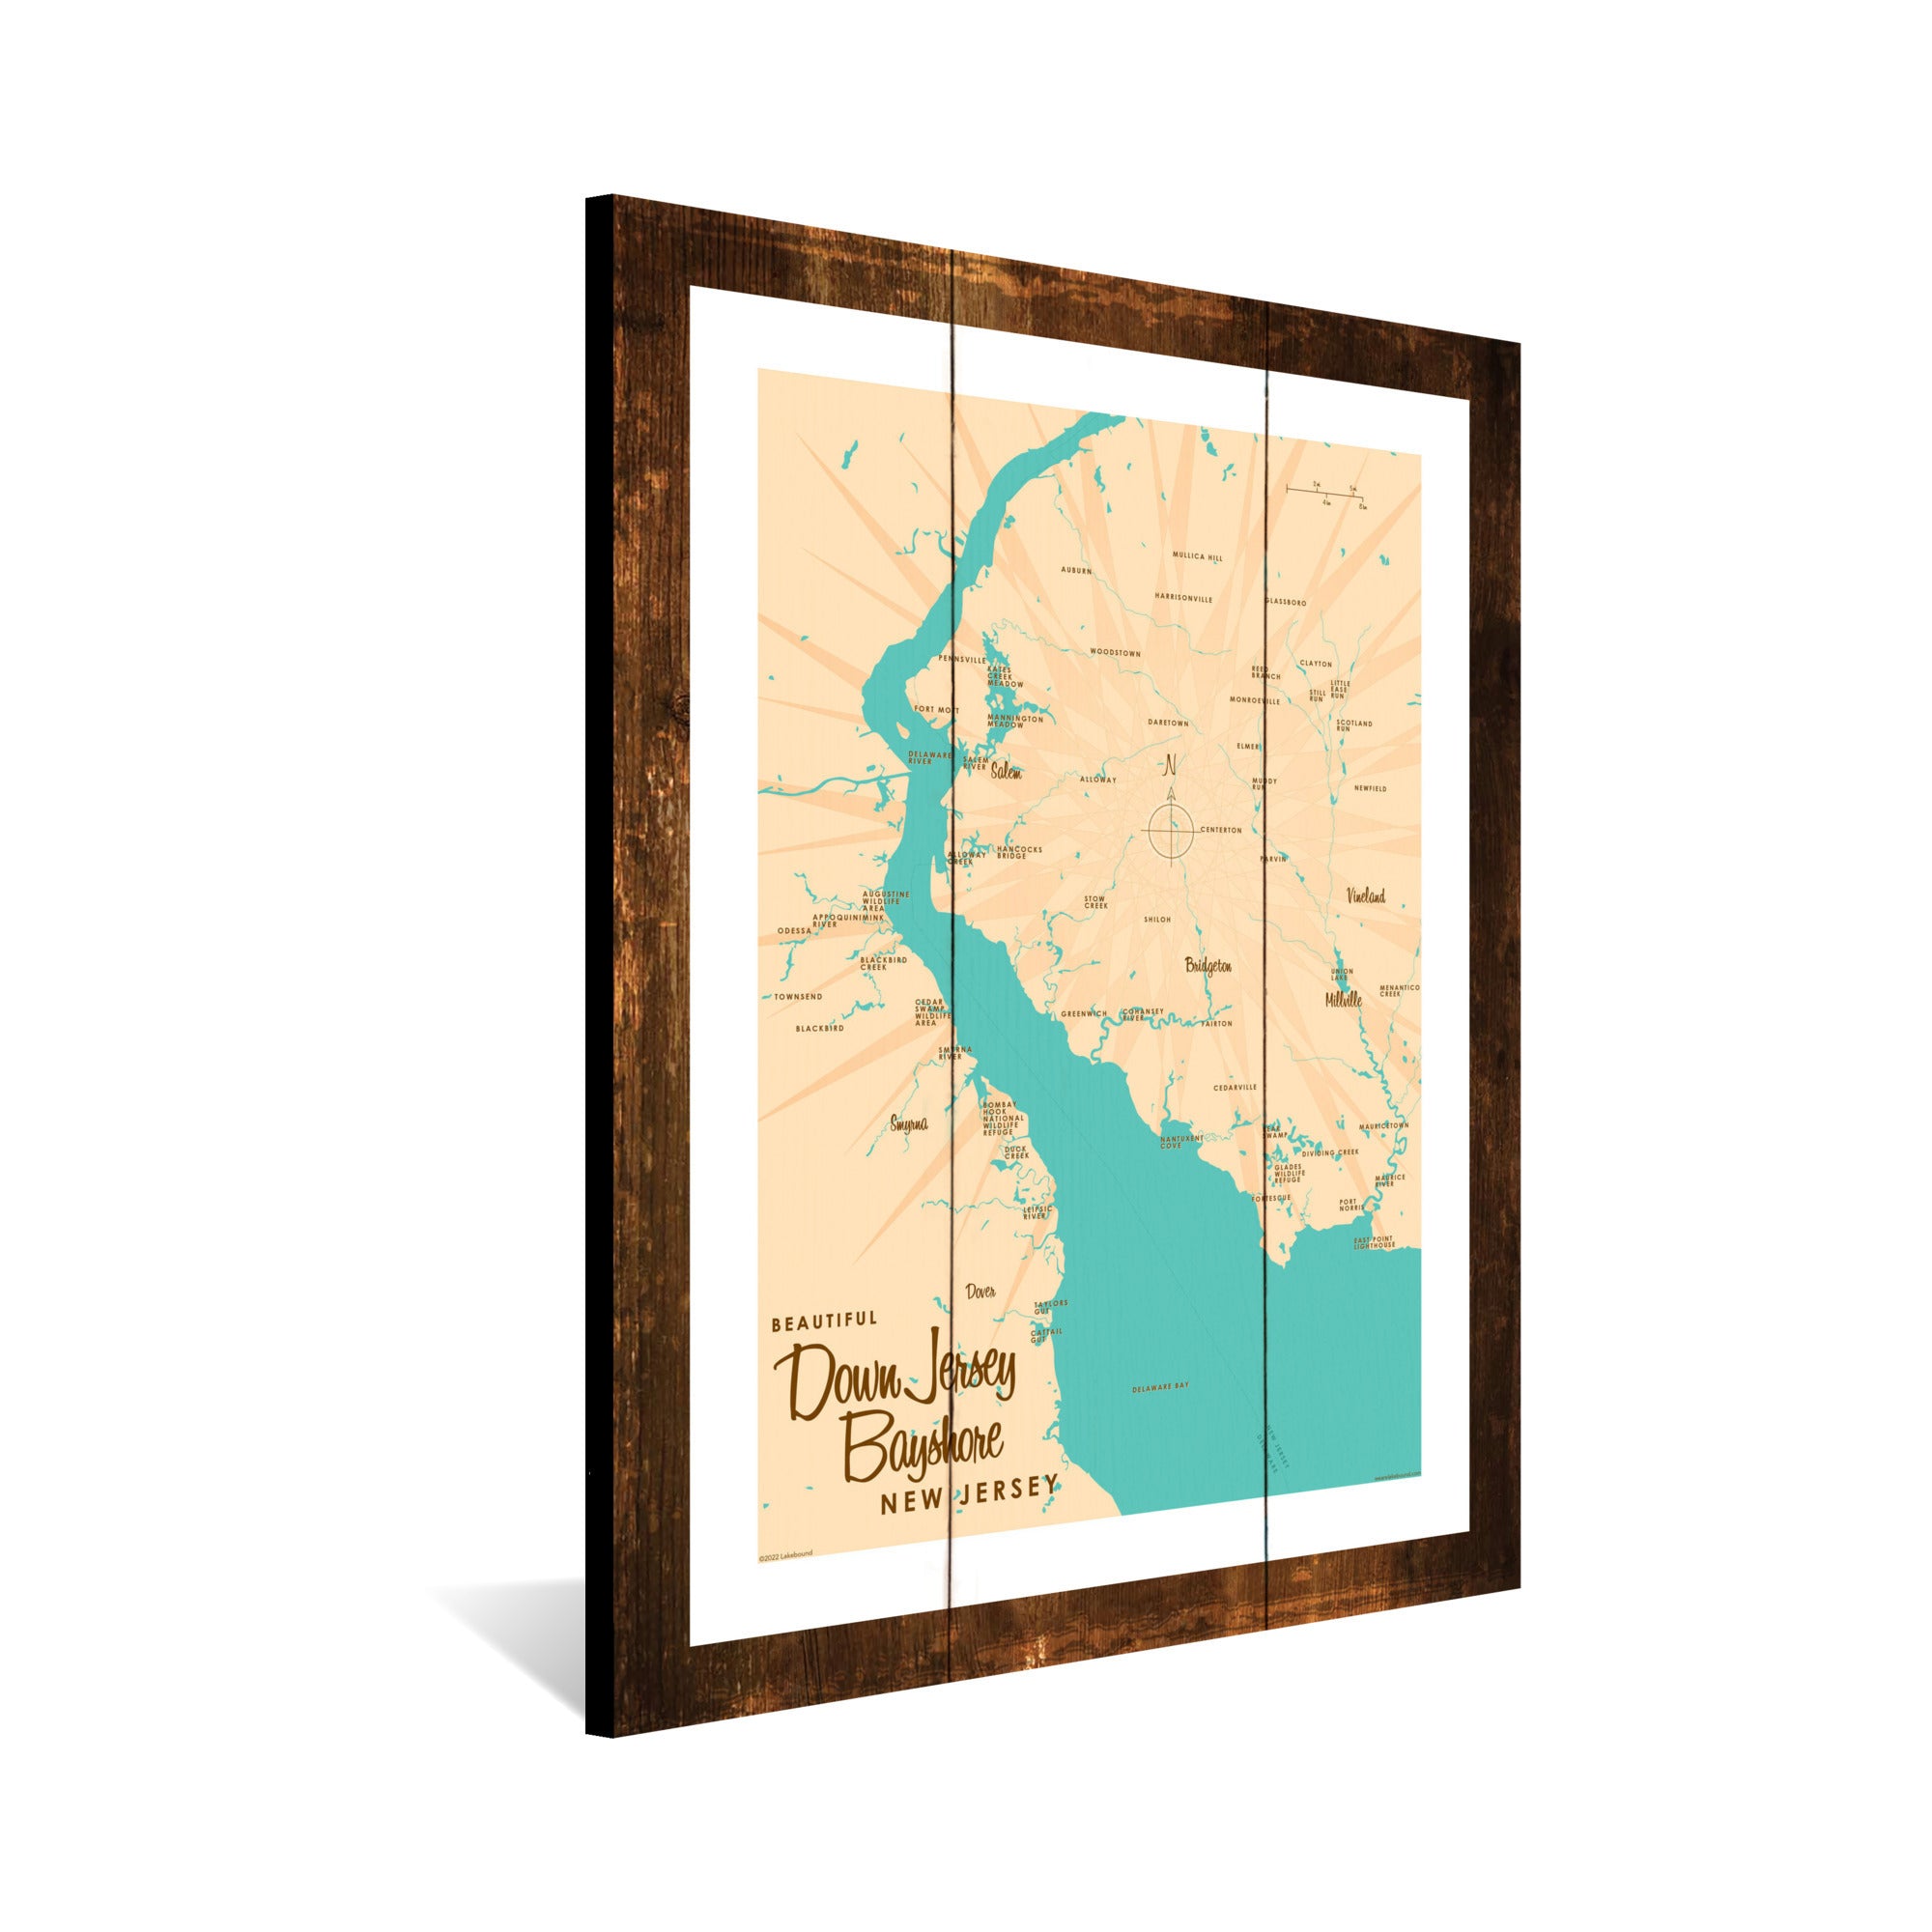 Down Jersey Bayshore New Jersey, Rustic Wood Sign Map Art